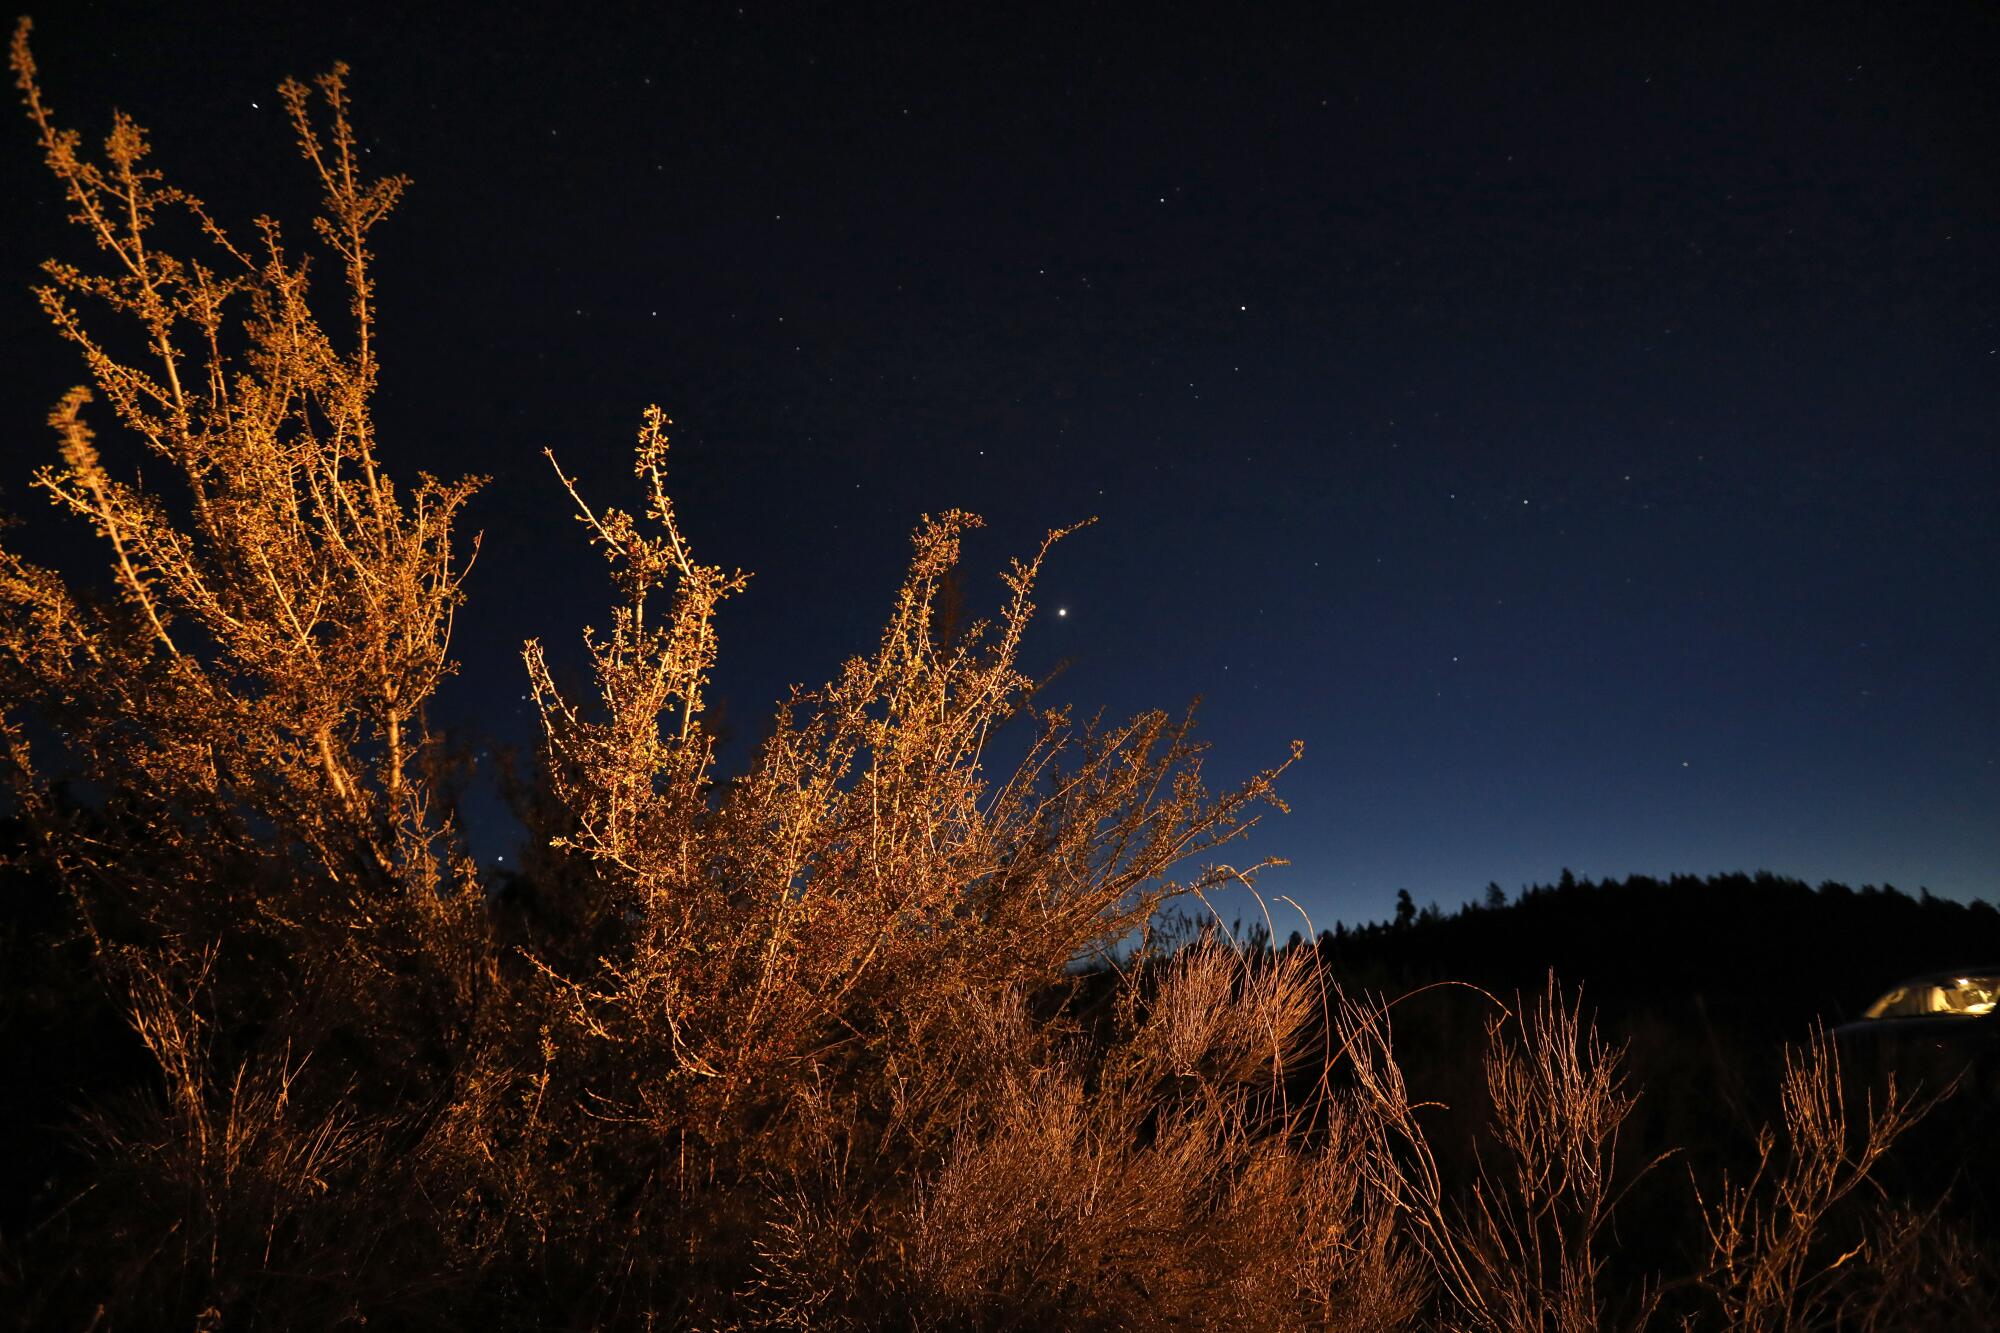 A night scene at Lava Beds National Monument with shrubby plants in the foreground and a hill in the distance